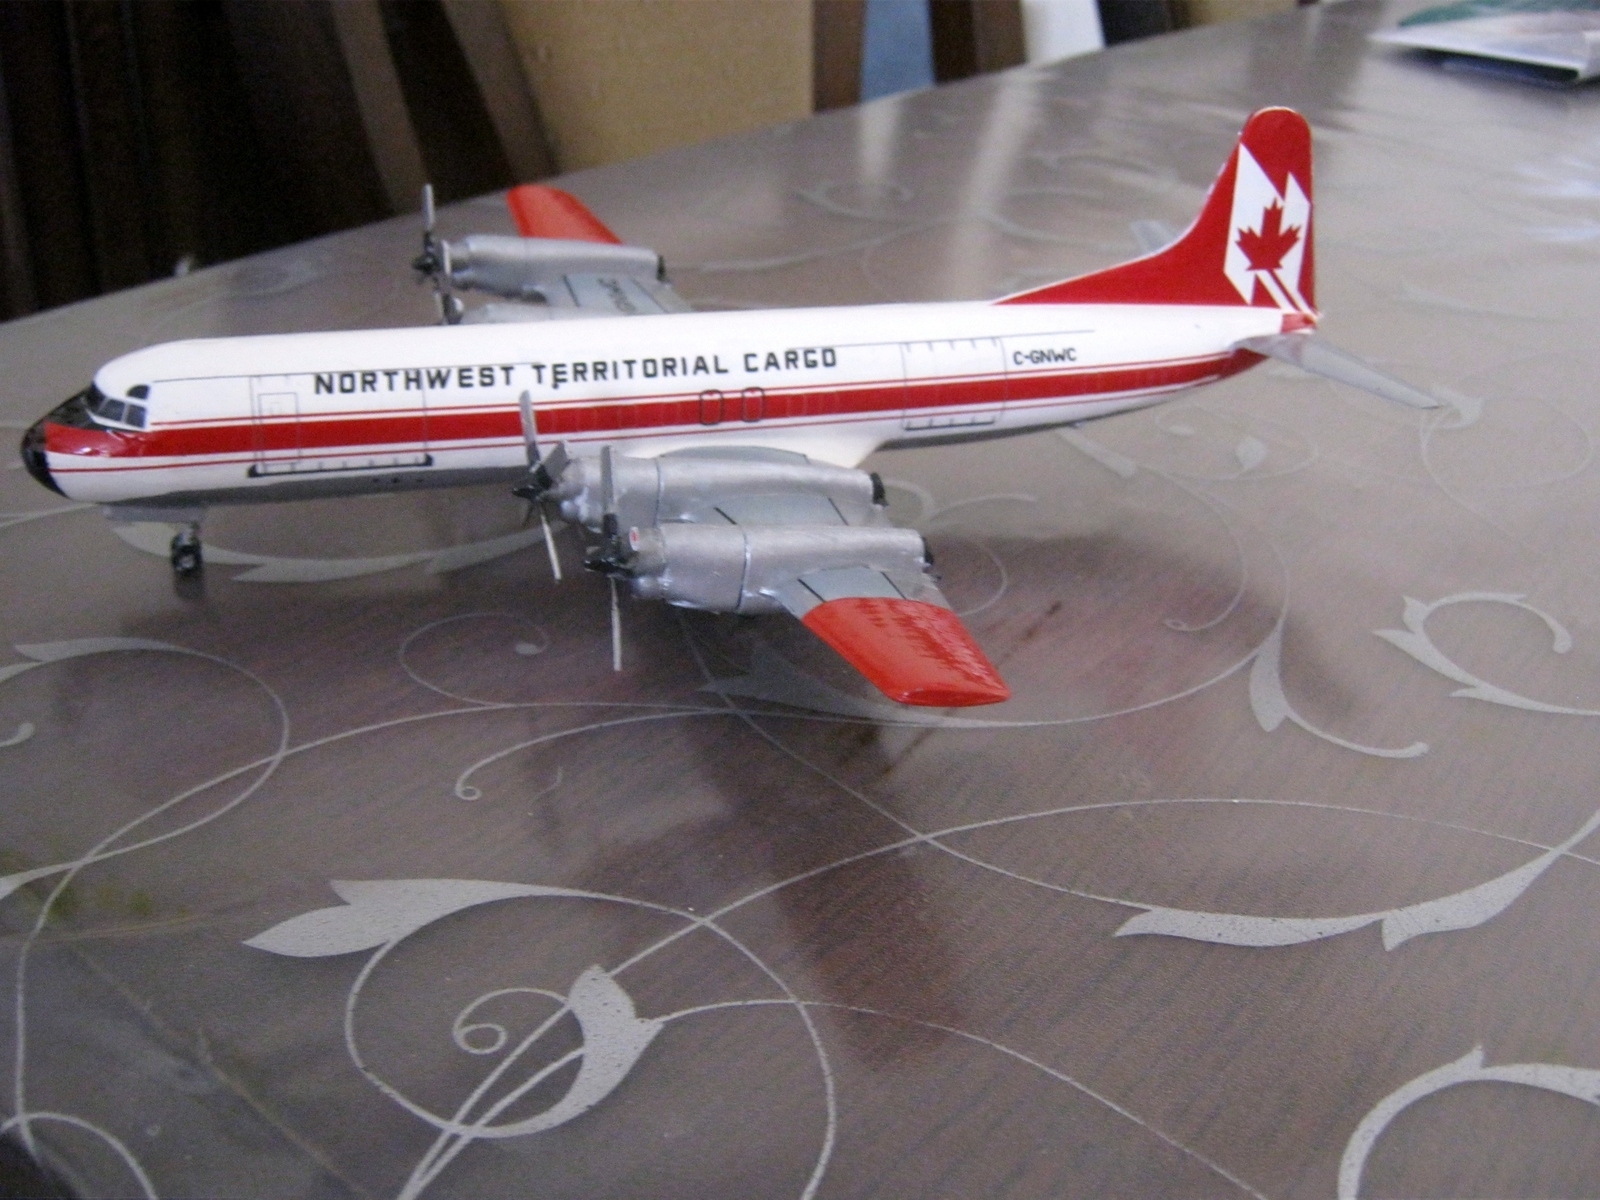 Details about   Dragon Models 1:400 L-188 Electra American Airlines Flagship Tucson w/Collector 